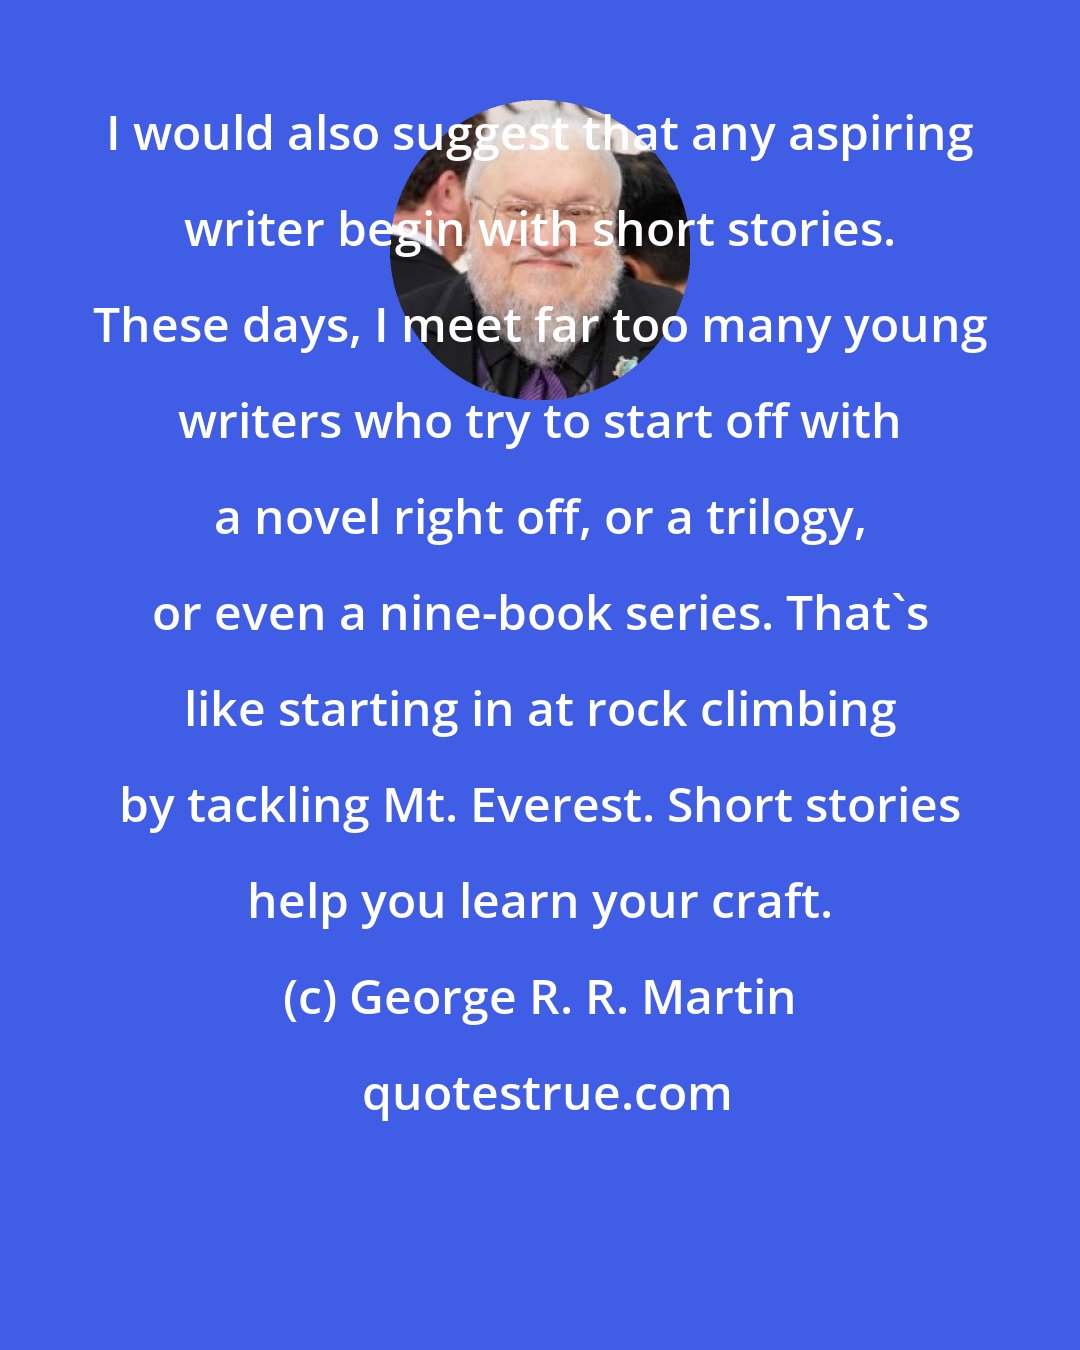 George R. R. Martin: I would also suggest that any aspiring writer begin with short stories. These days, I meet far too many young writers who try to start off with a novel right off, or a trilogy, or even a nine-book series. That's like starting in at rock climbing by tackling Mt. Everest. Short stories help you learn your craft.